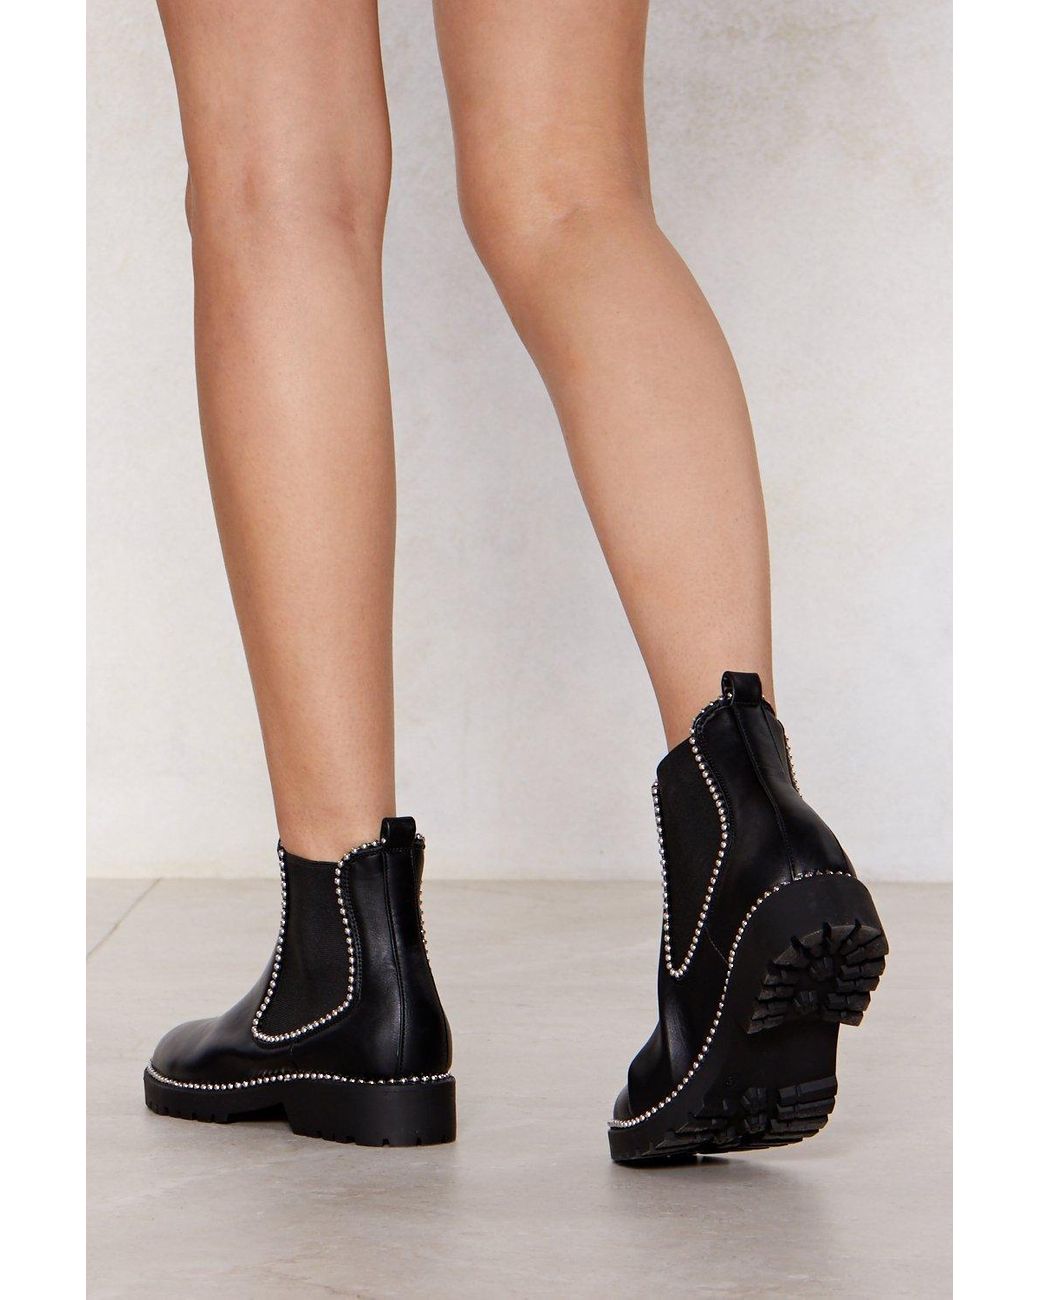 Nasty Gal Studded Faux Leather Flat Chelsea Boots in Black | Lyst